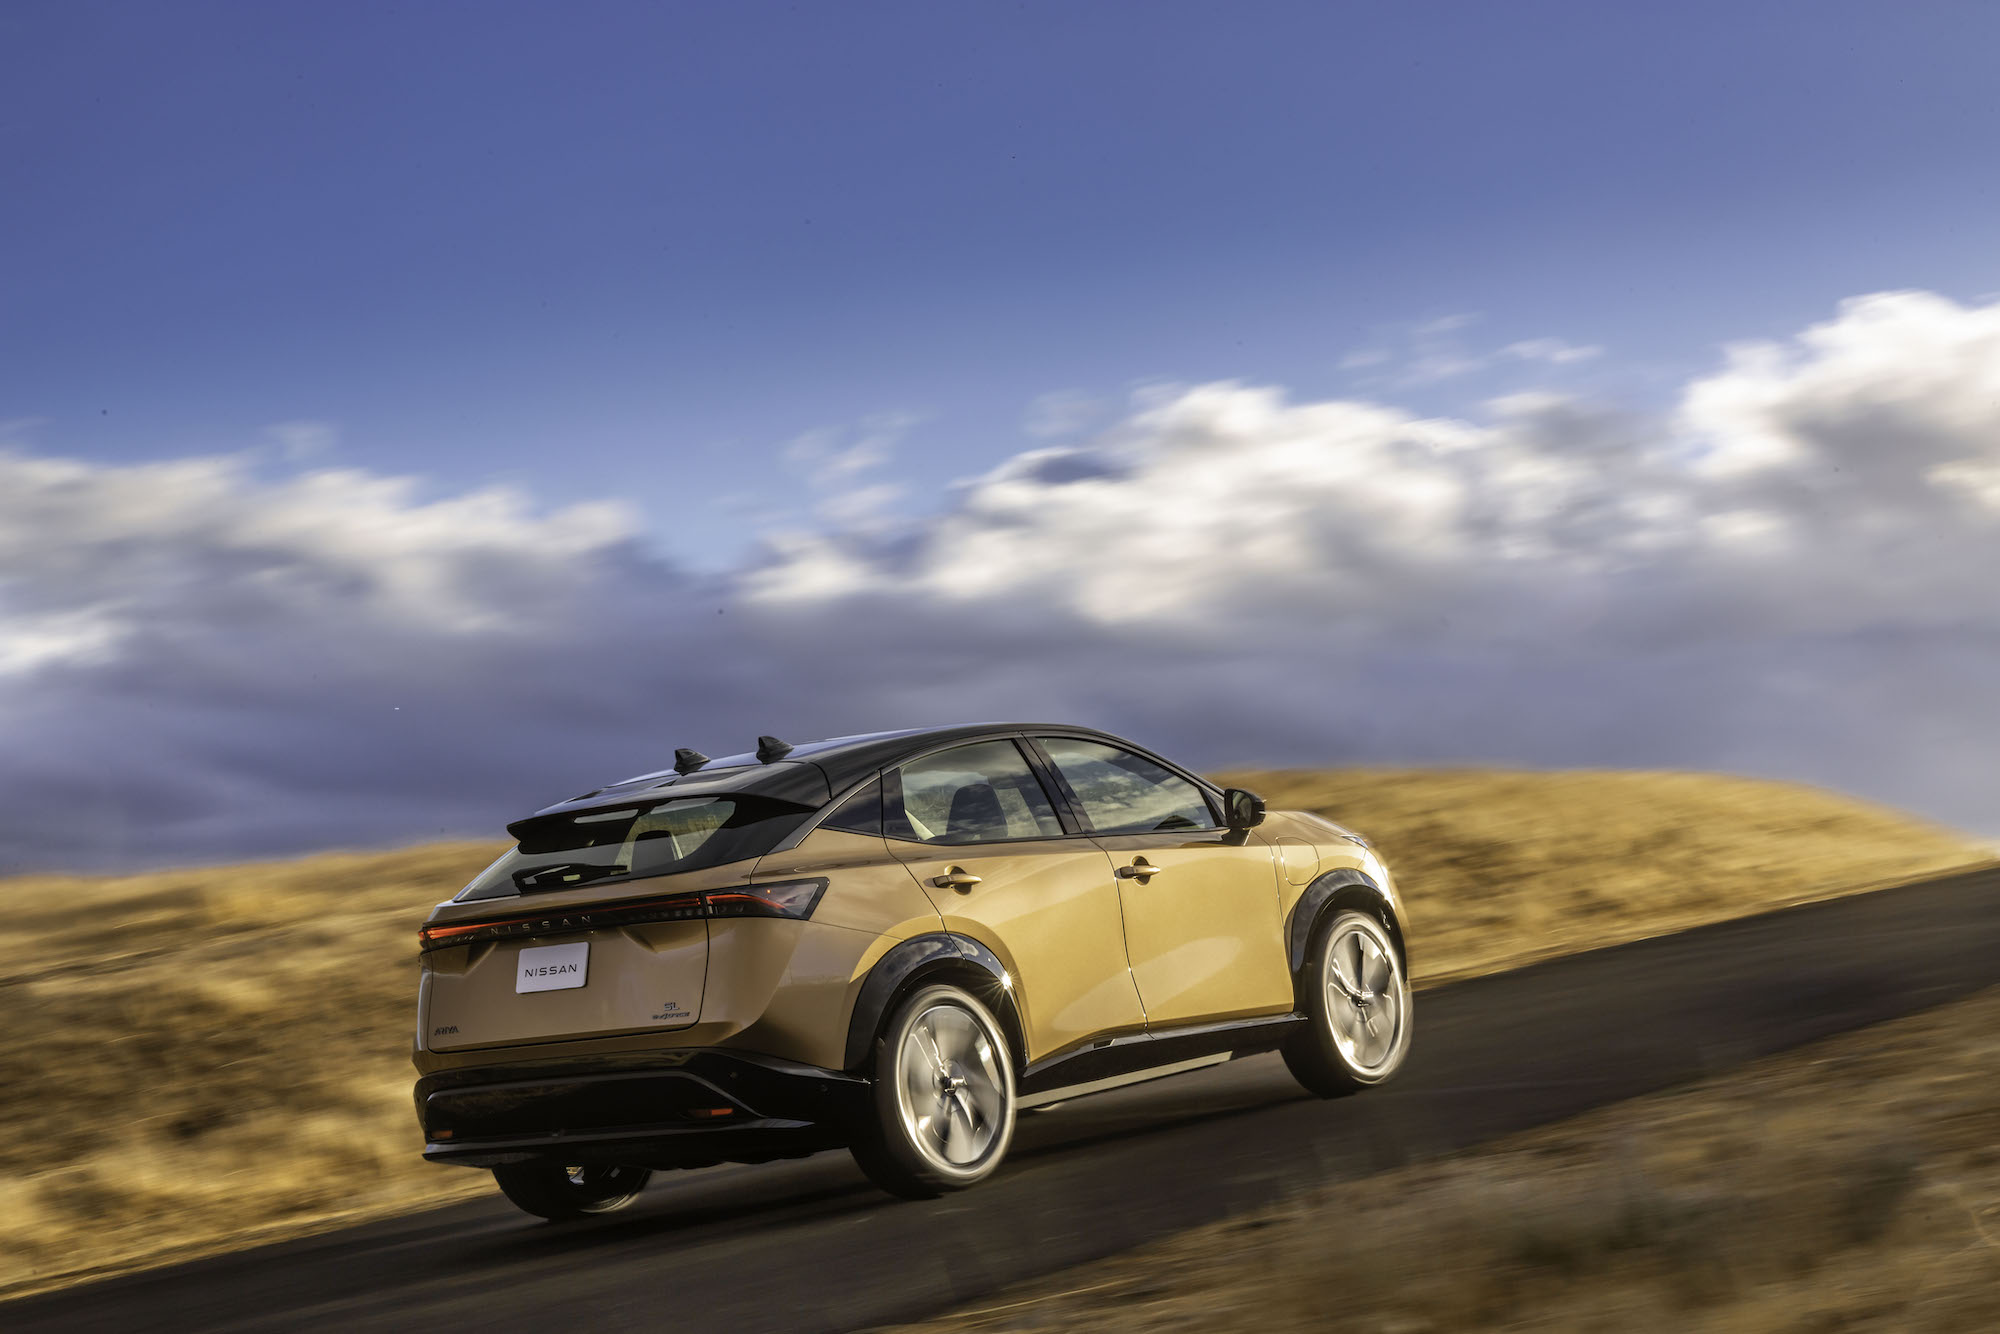 A gold 2022 Nissa Ariya electric compact SUV traveling uphill on a partly sunny day